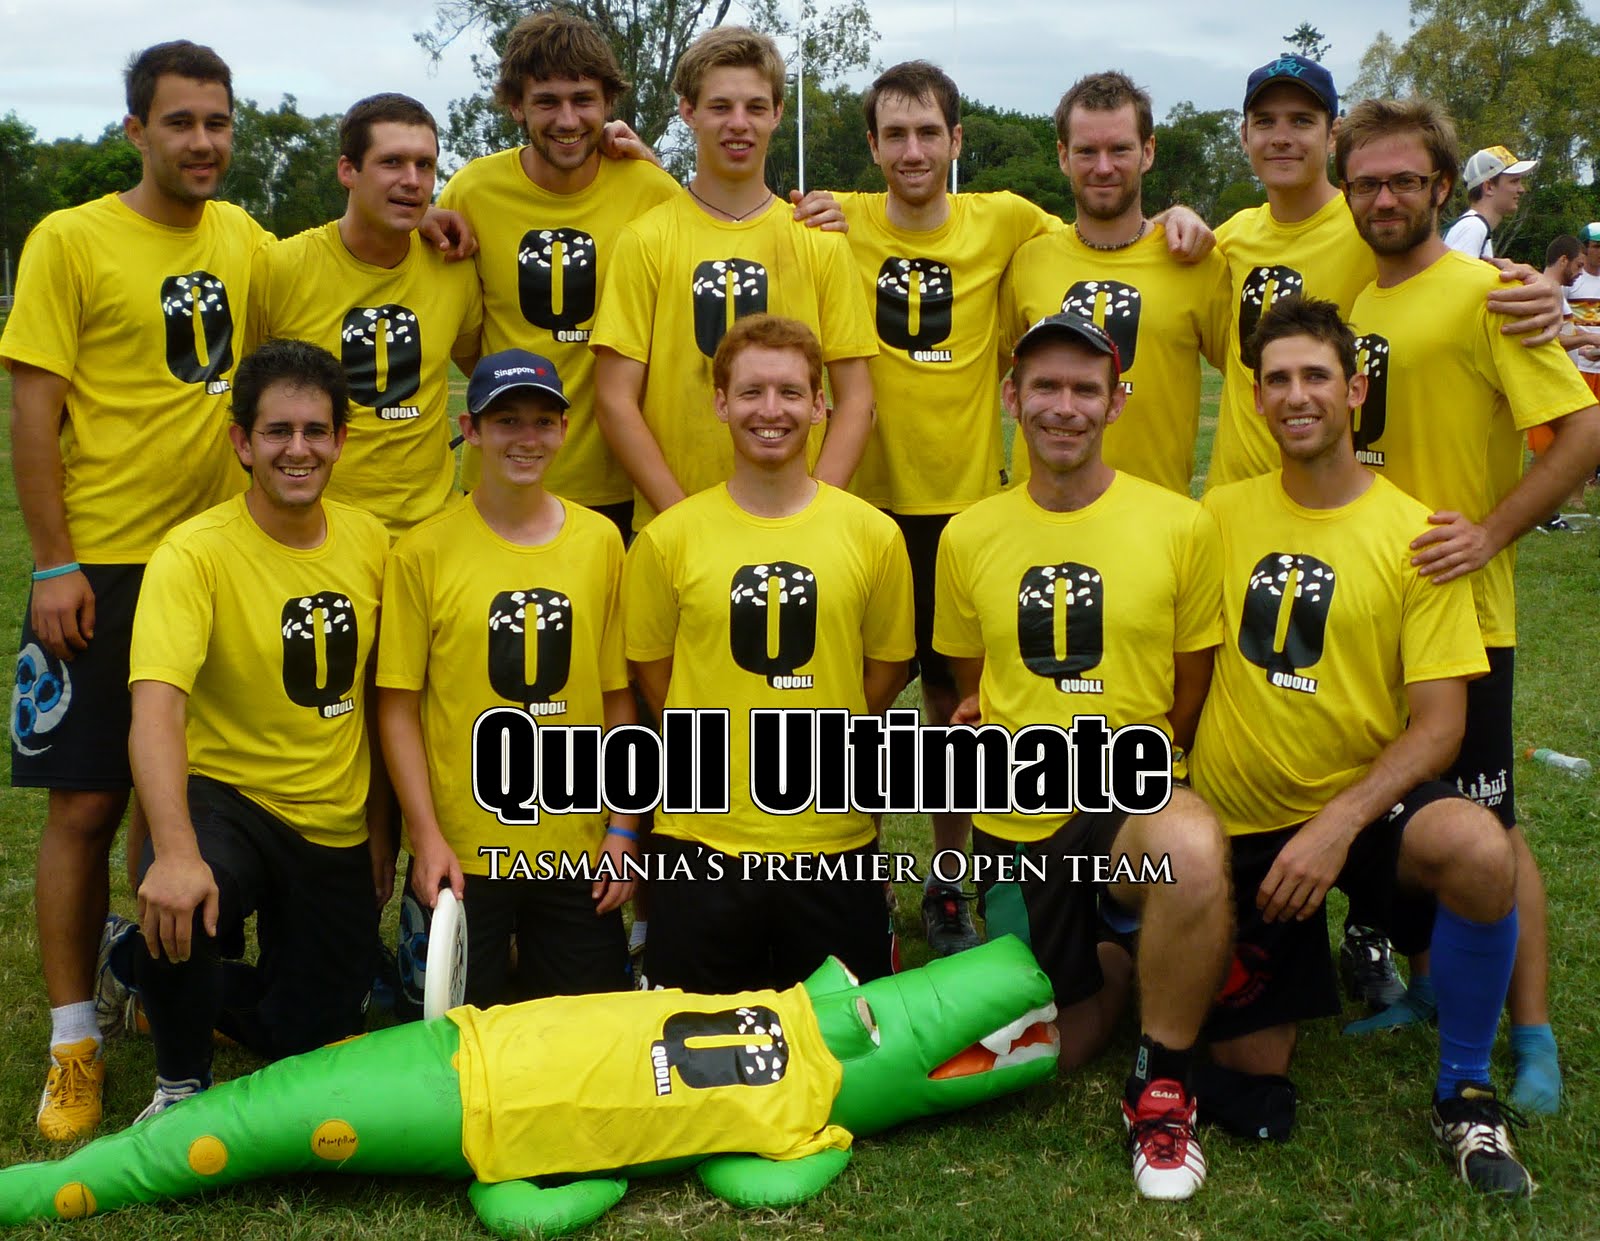 Quoll Ultimate